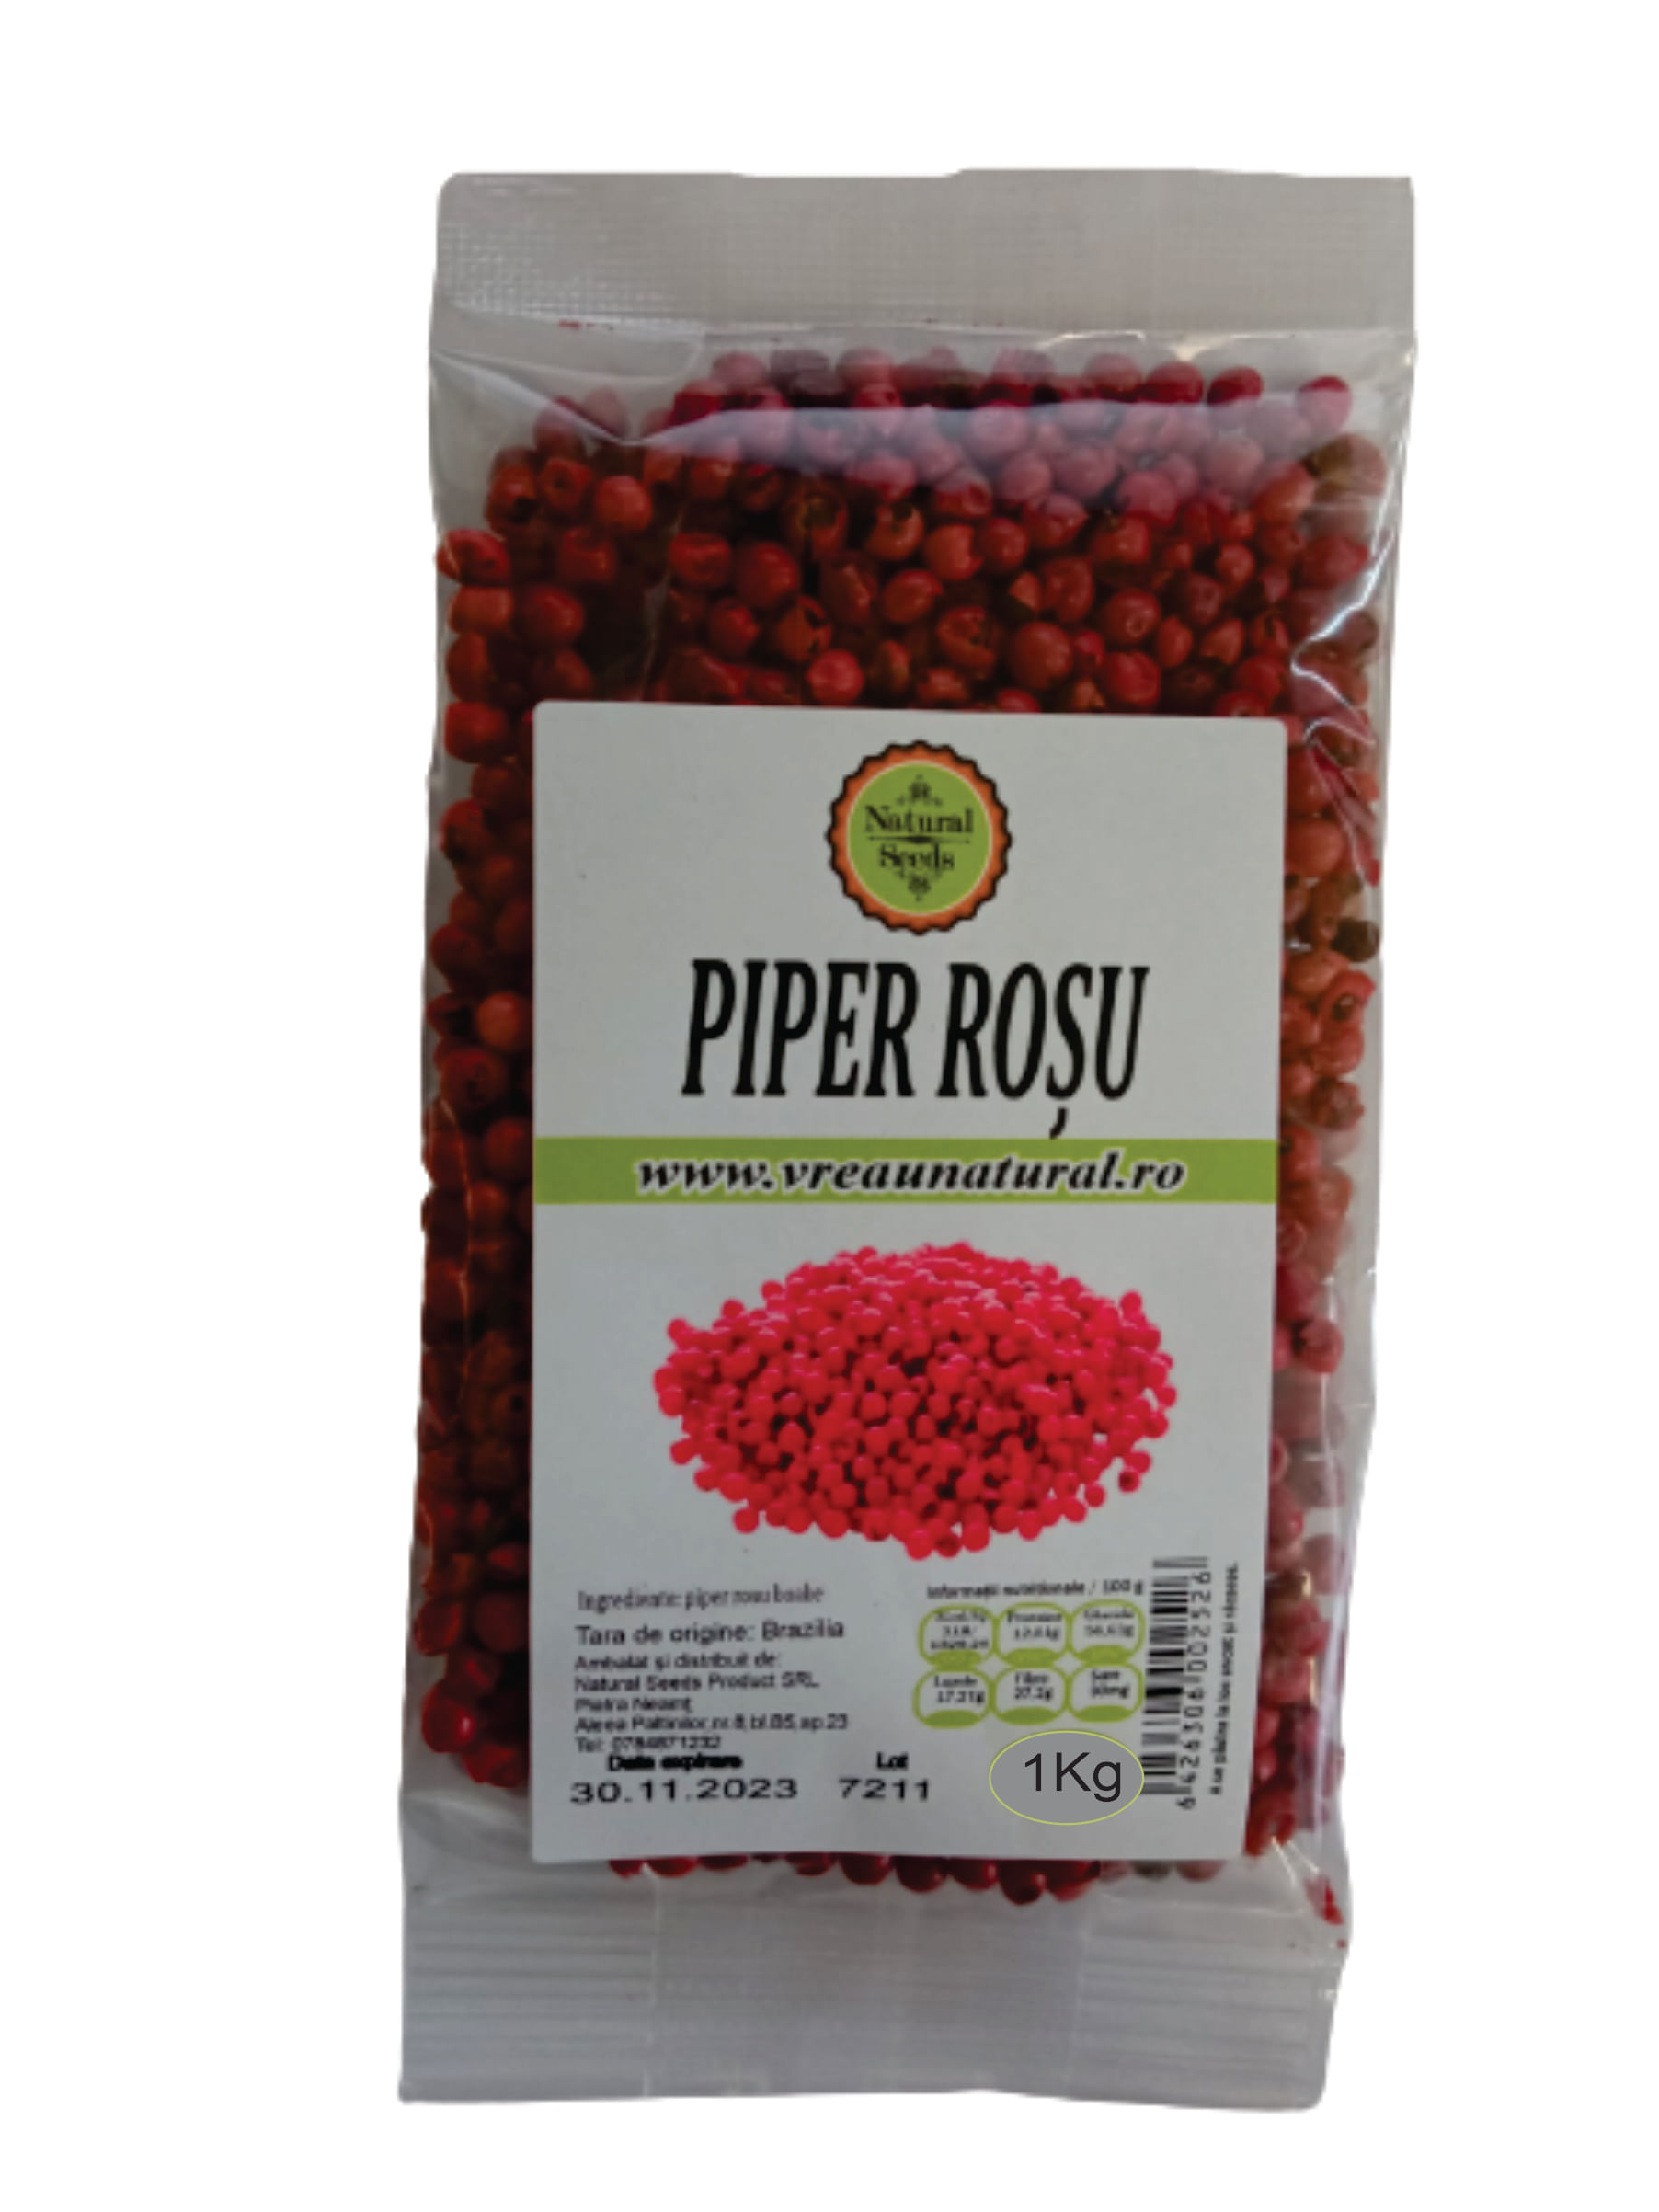 Piper rosu, Natural Seeds Product